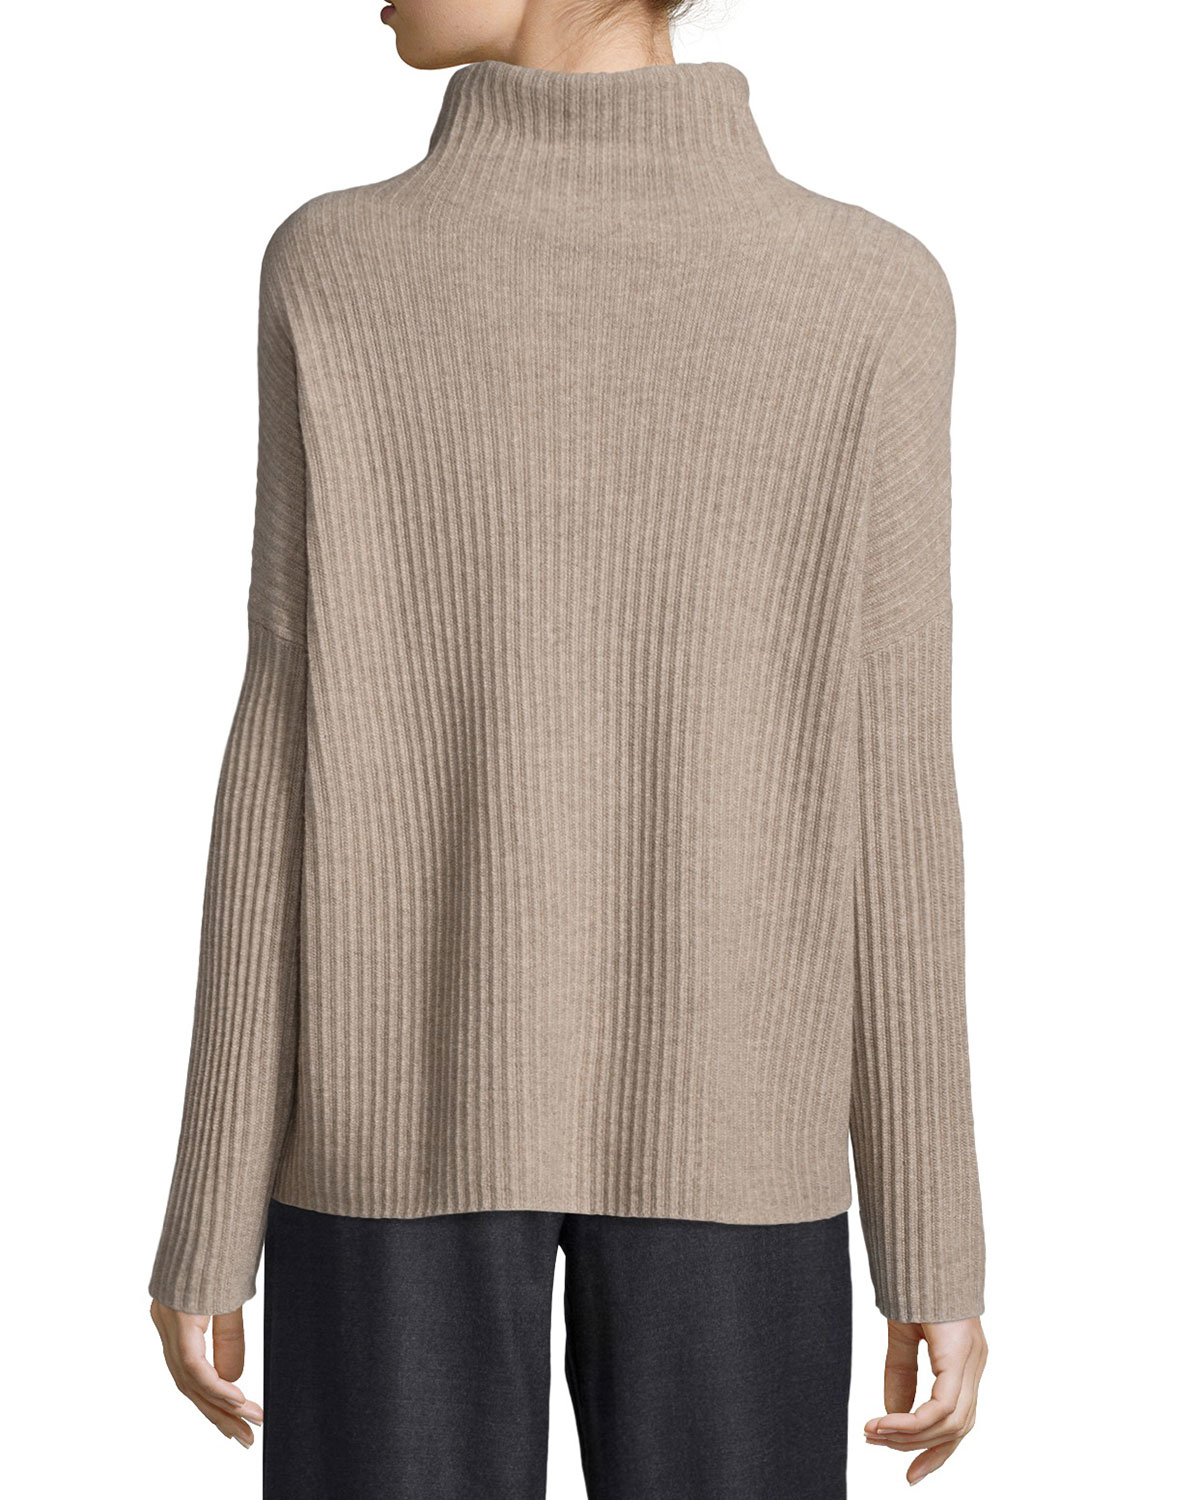 Eileen Fisher Boxy Funnel-neck Cashmere Sweater in Almond (Brown) - Lyst